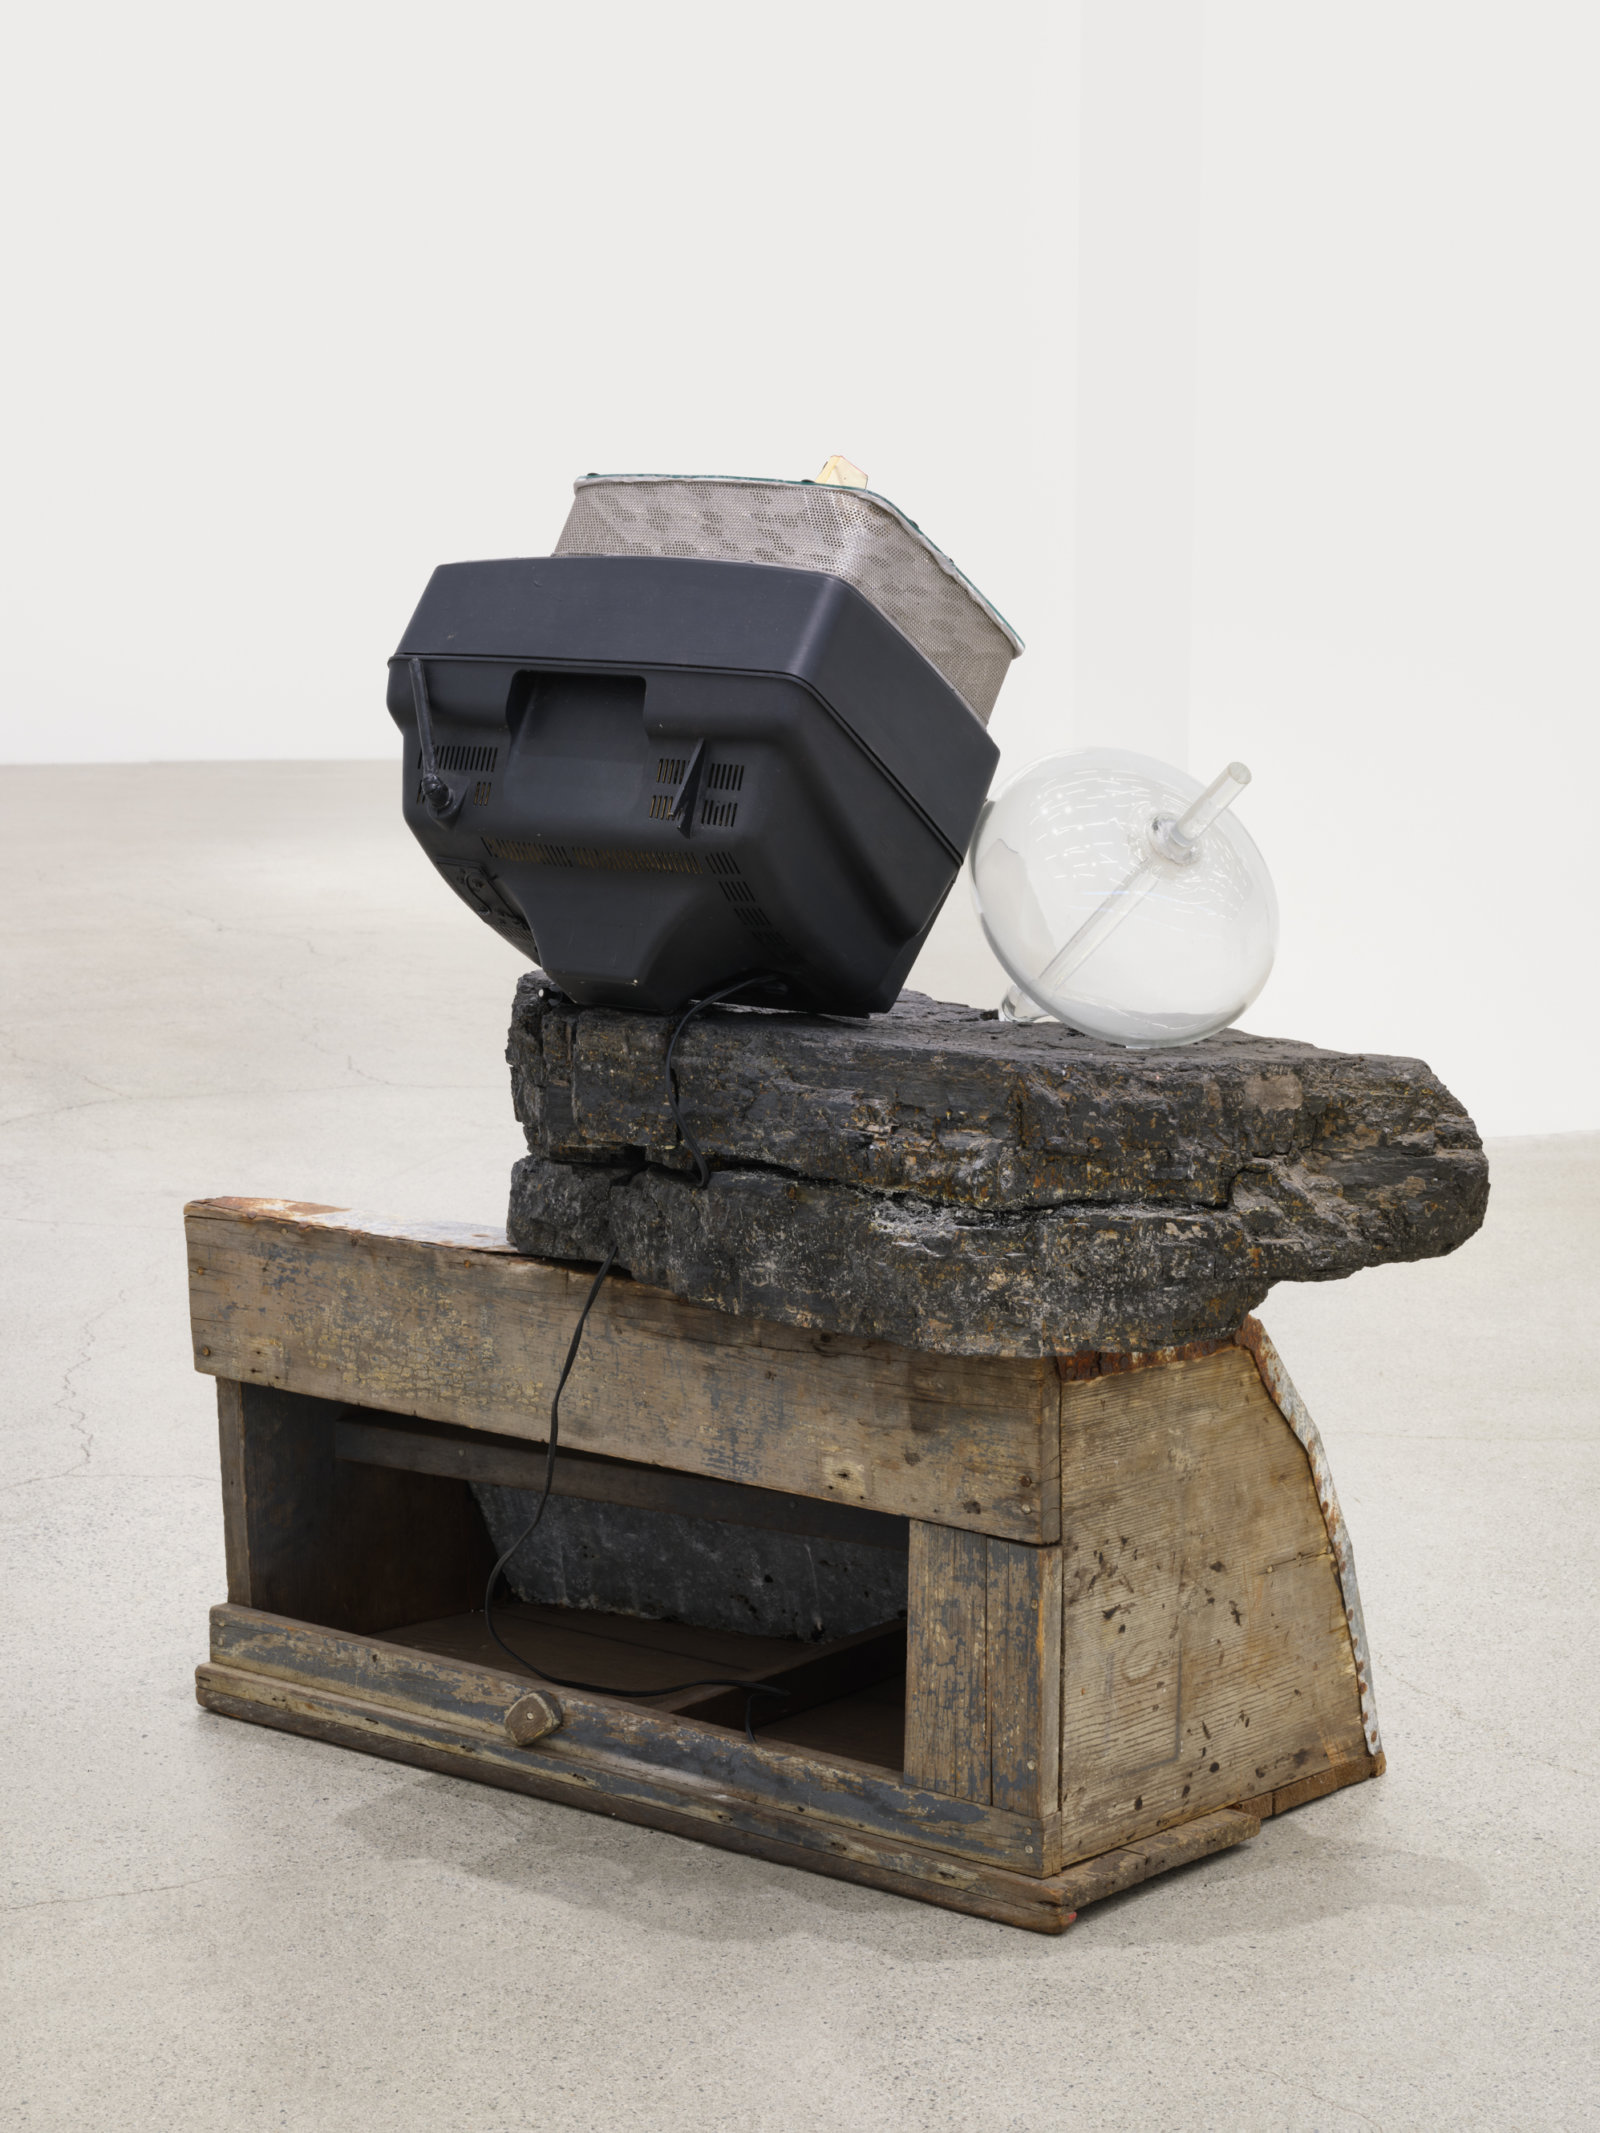 Jerry Pethick, Floating Free, 1972–93, wood, galvanized metal, plastic, coal, TV, duratrans, blown glass, lenses, aluminum, tiles, silicone, 42 3/4 x 26 1/2 x 41 1/2 in. (109 x 67 x 105 cm)